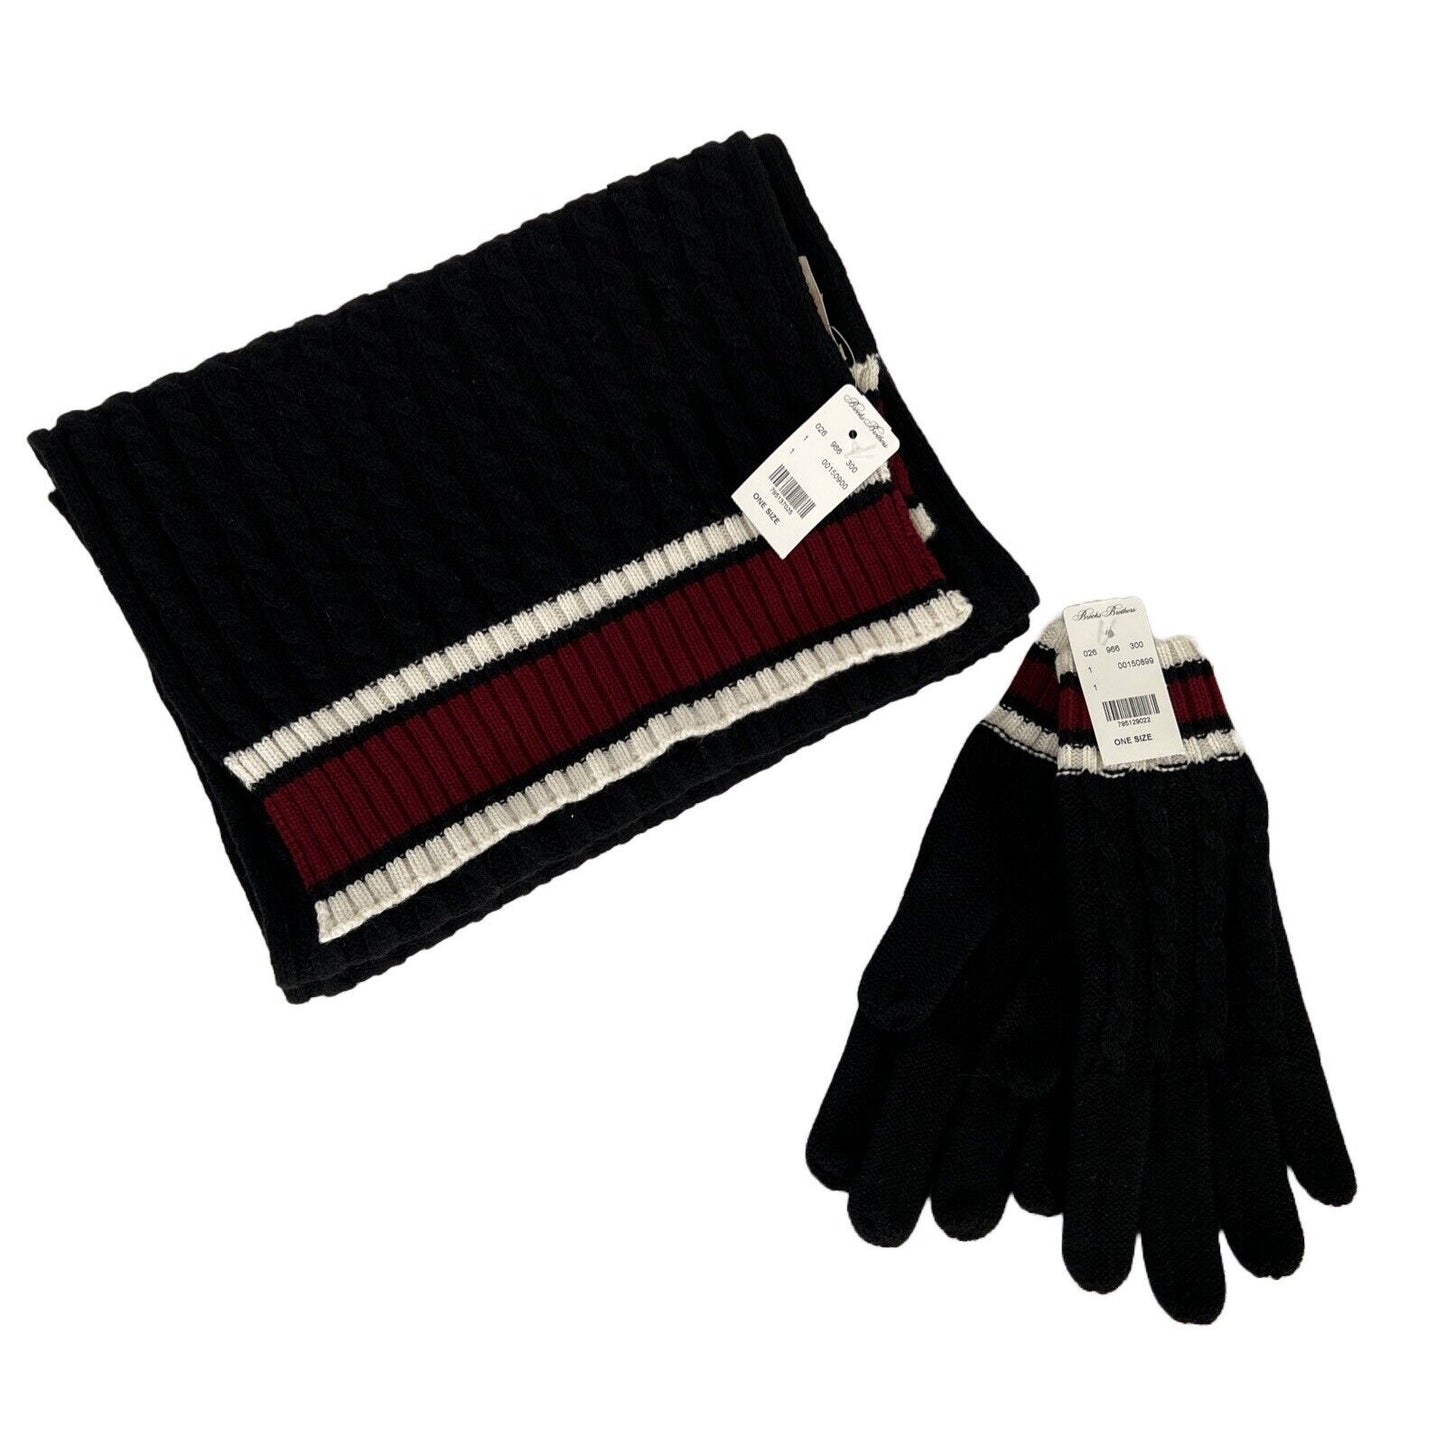 NEW Brooks Brothers Women's Black/Red Wool Scarf and Glove Set One Size